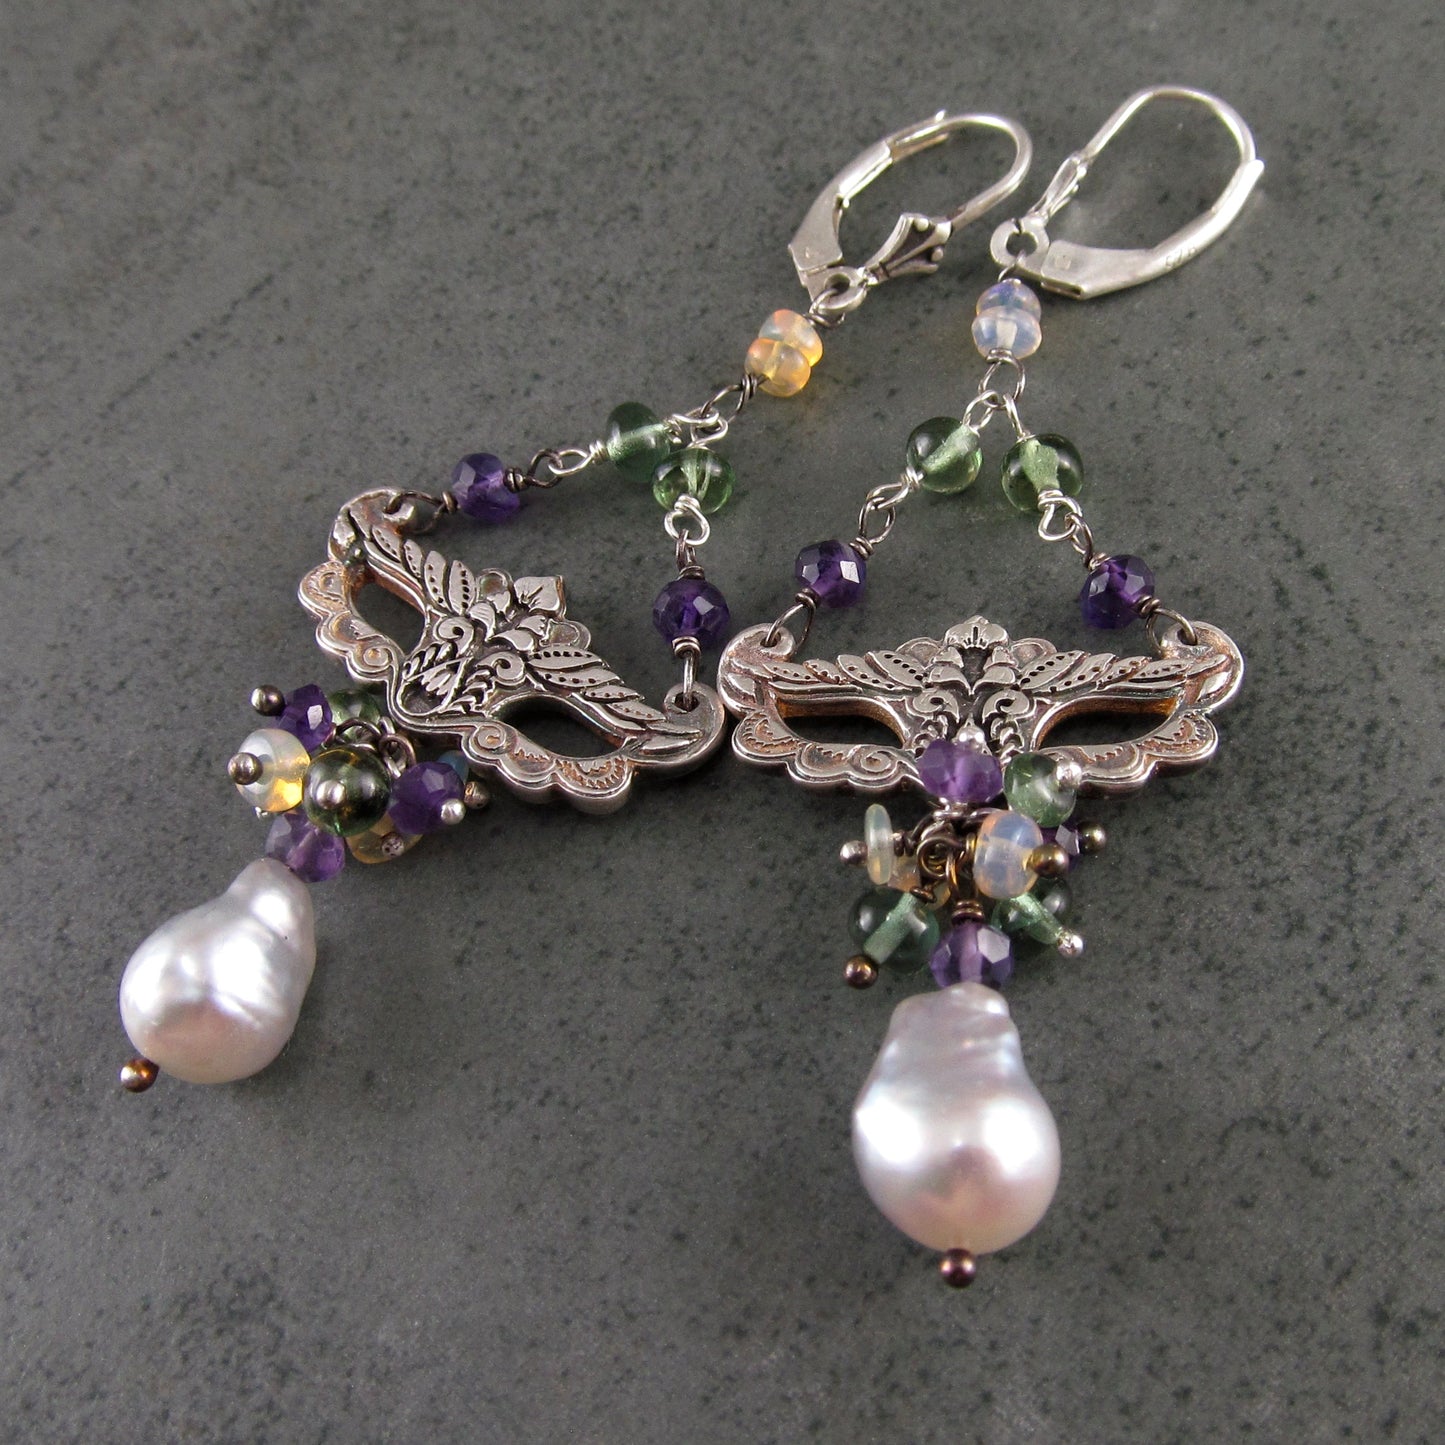 Masquerade earrings, handmade recycled fine silver, amethyst, green apatite and silver Akoya saltwater pearl earrings-Mardi Gras Masque